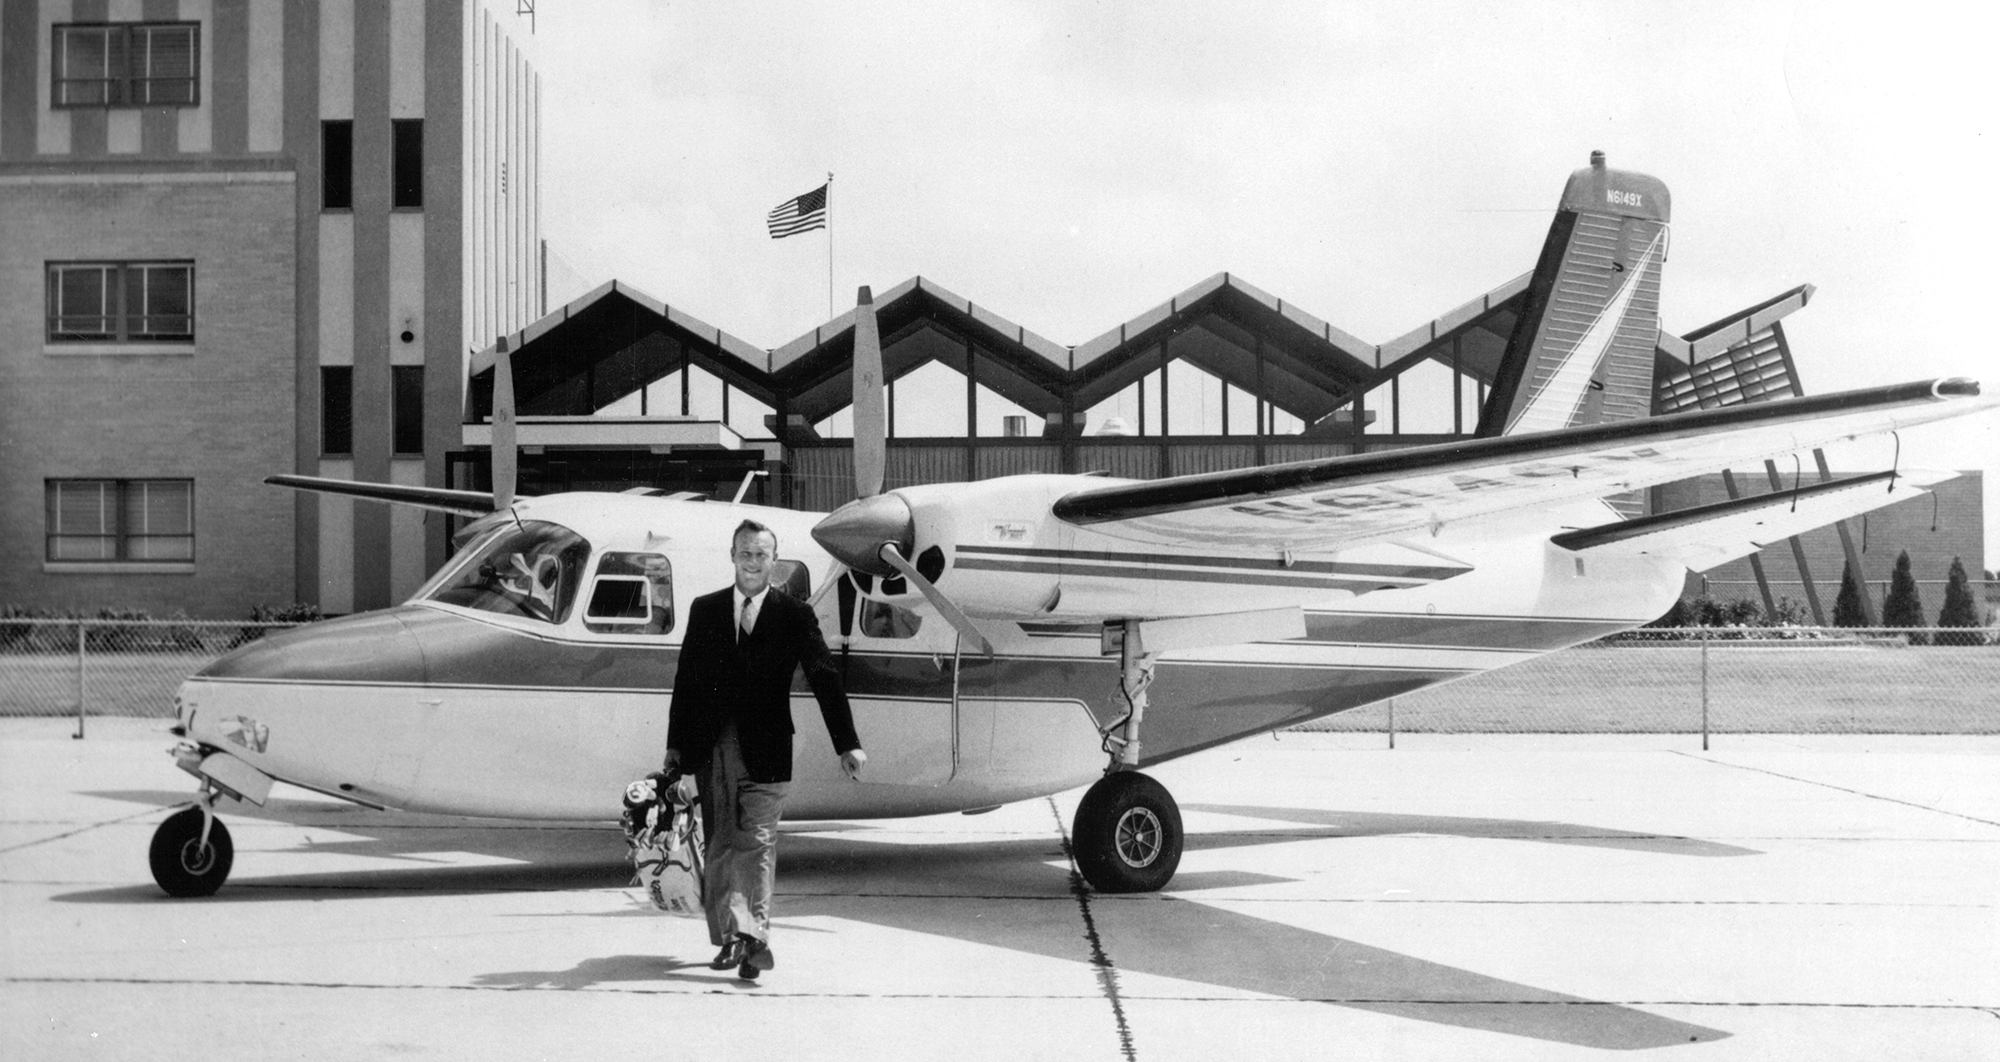 For more than five decades, Palmer relied on a variety of business airplanes